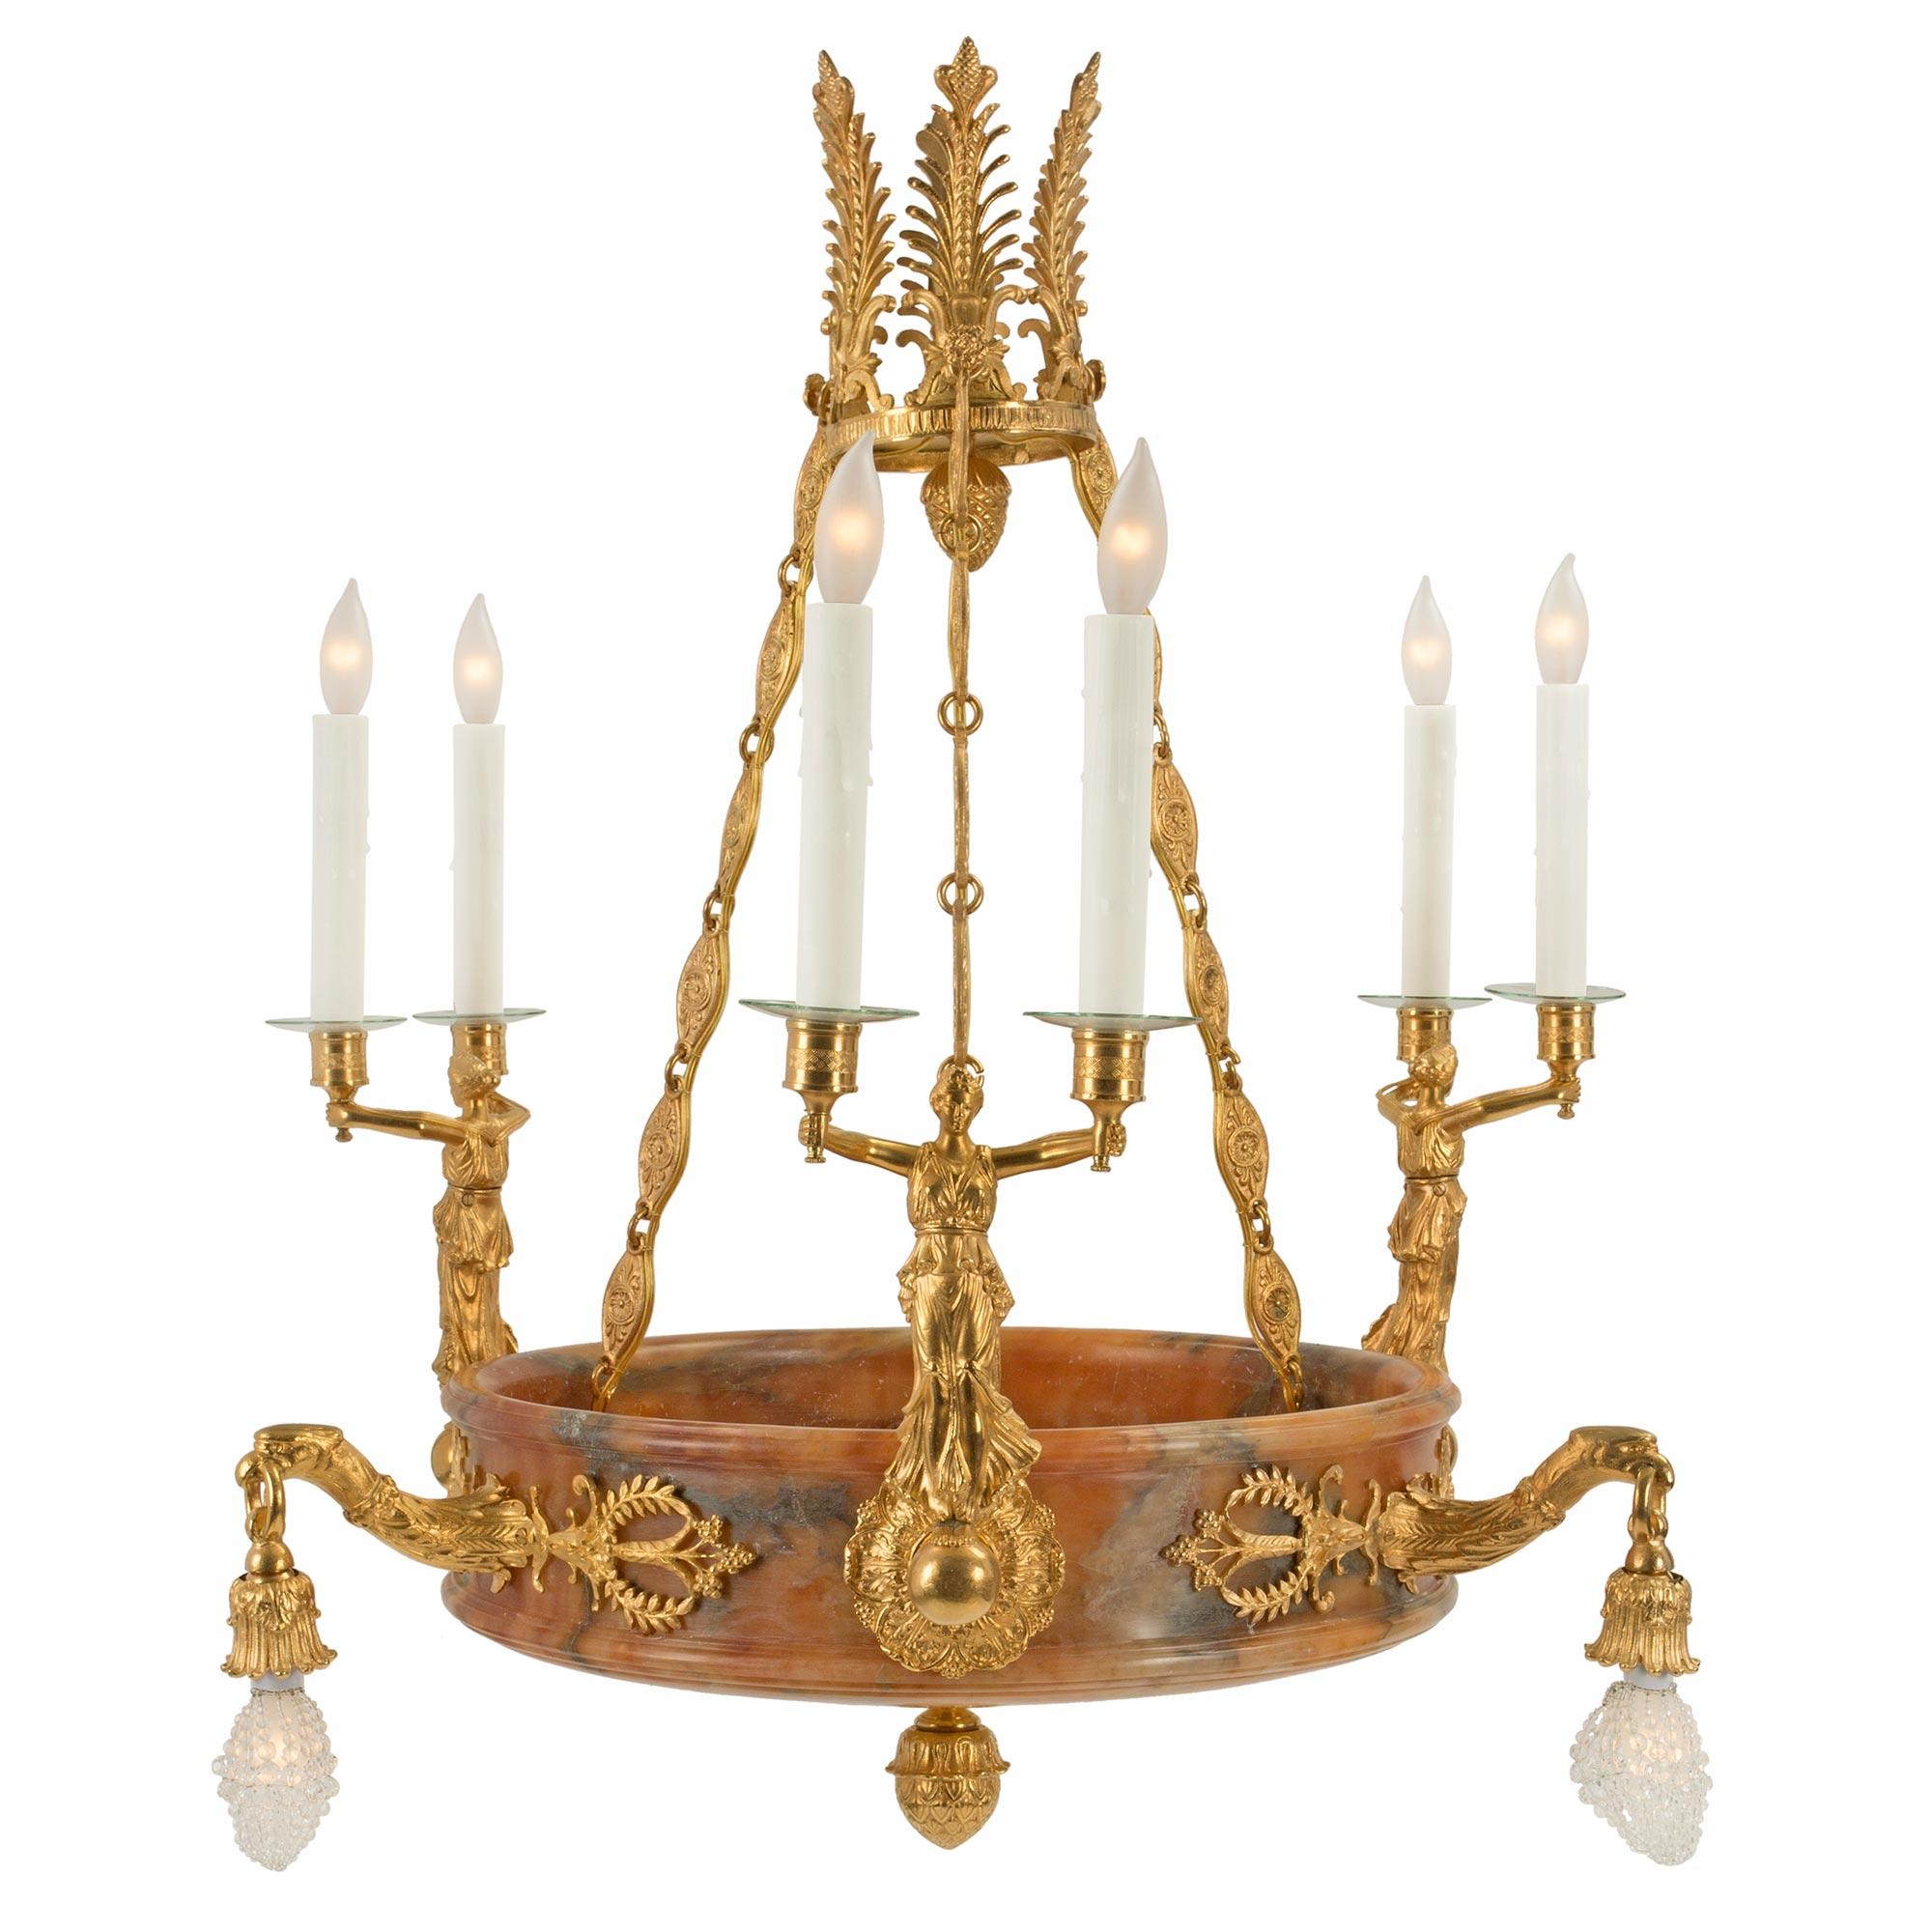 A handsome and impressive French 19th century Empire st. alabaster and ormolu twelve light chandelier. The chandelier has a circular dome with curved bottom and a central ormolu finial. The dome with mottled edges, is richly decorated by electrified